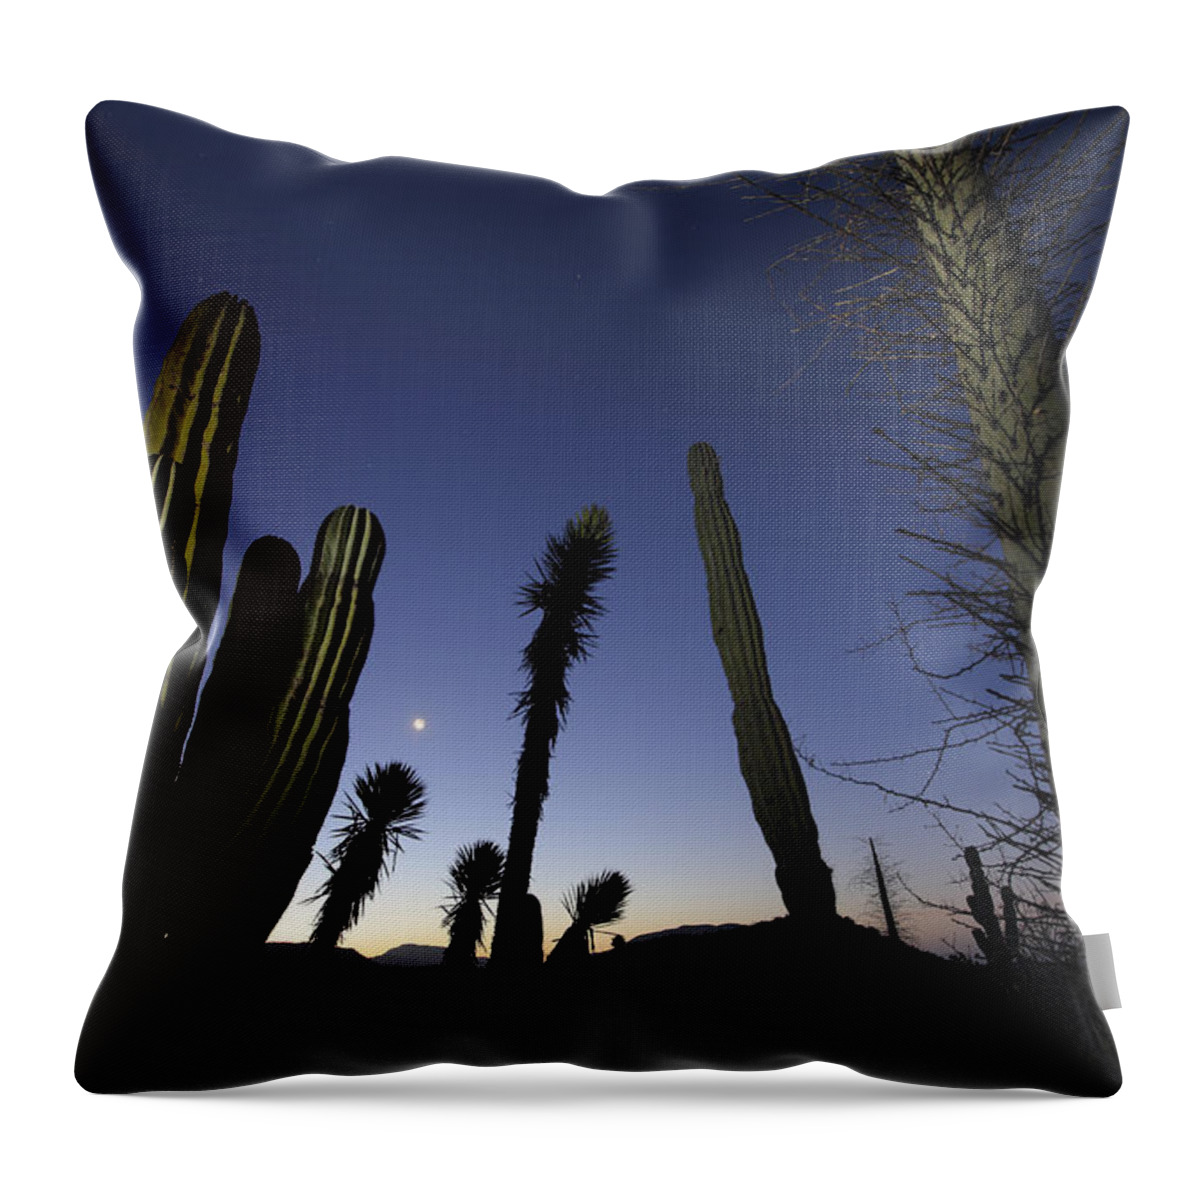 Mp Throw Pillow featuring the photograph Boojum Tree Idria Columnaris And Cardon by Cyril Ruoso